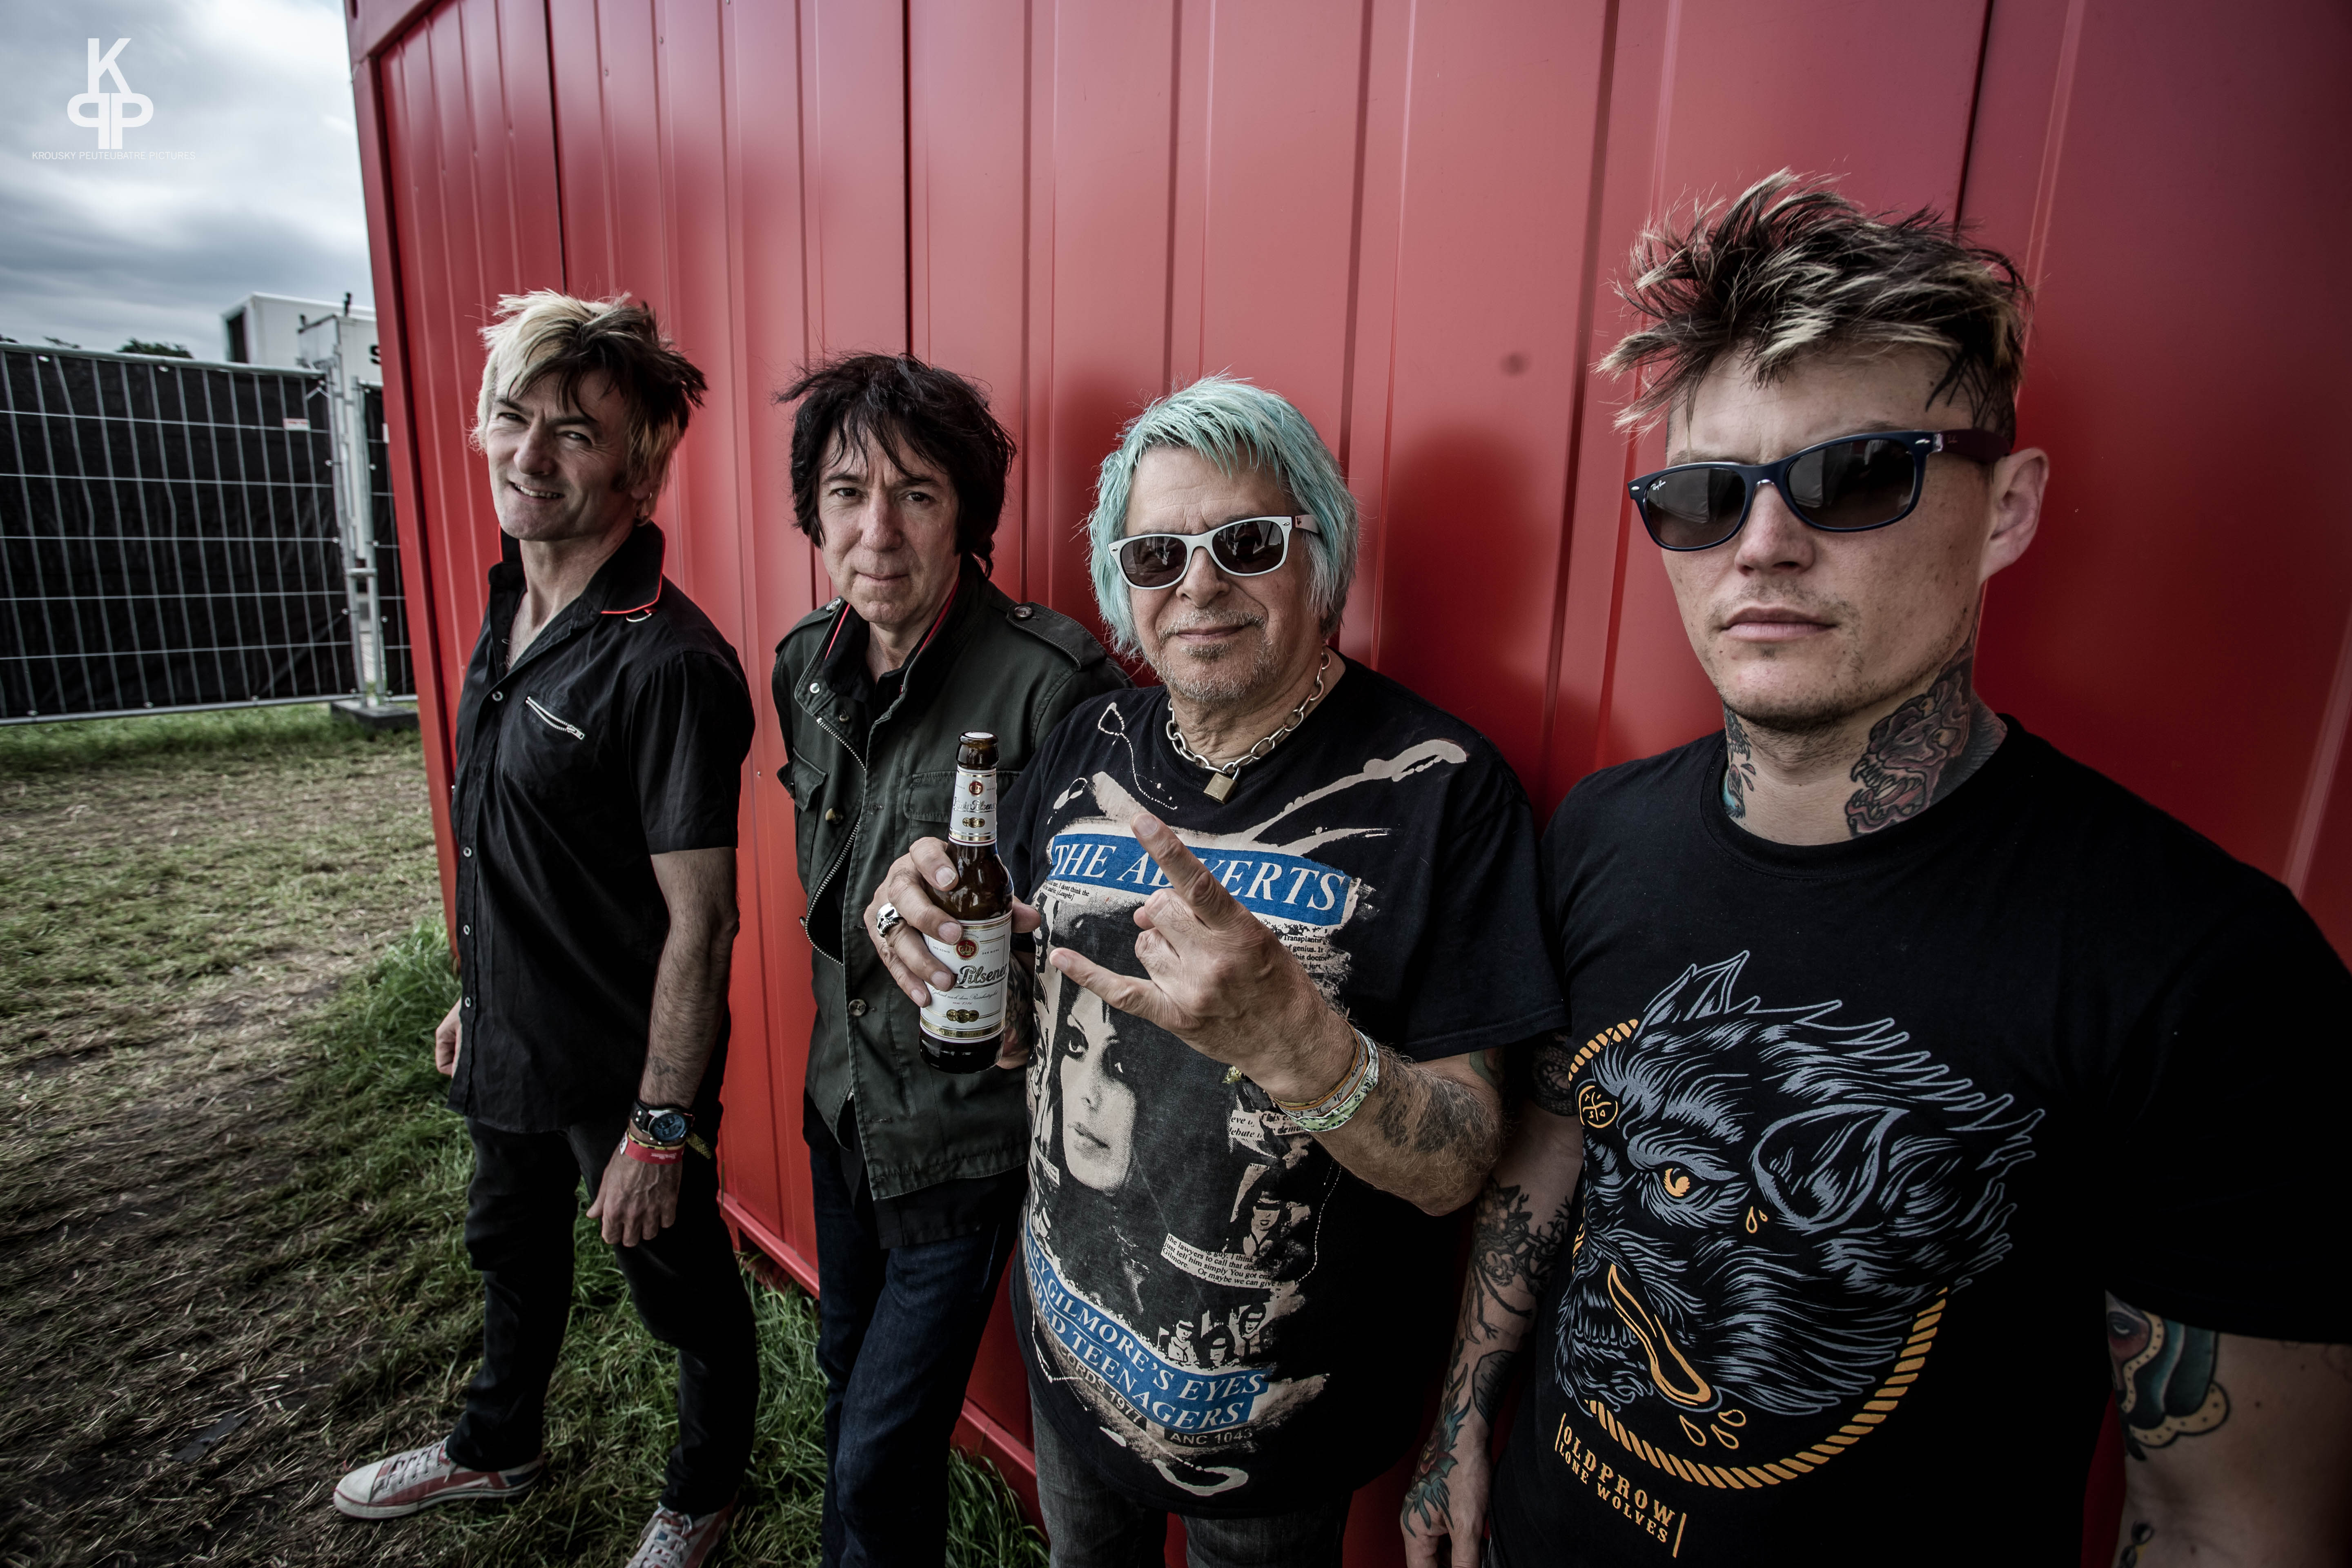 UK SUBS – Support: NASTY RUMOURSis